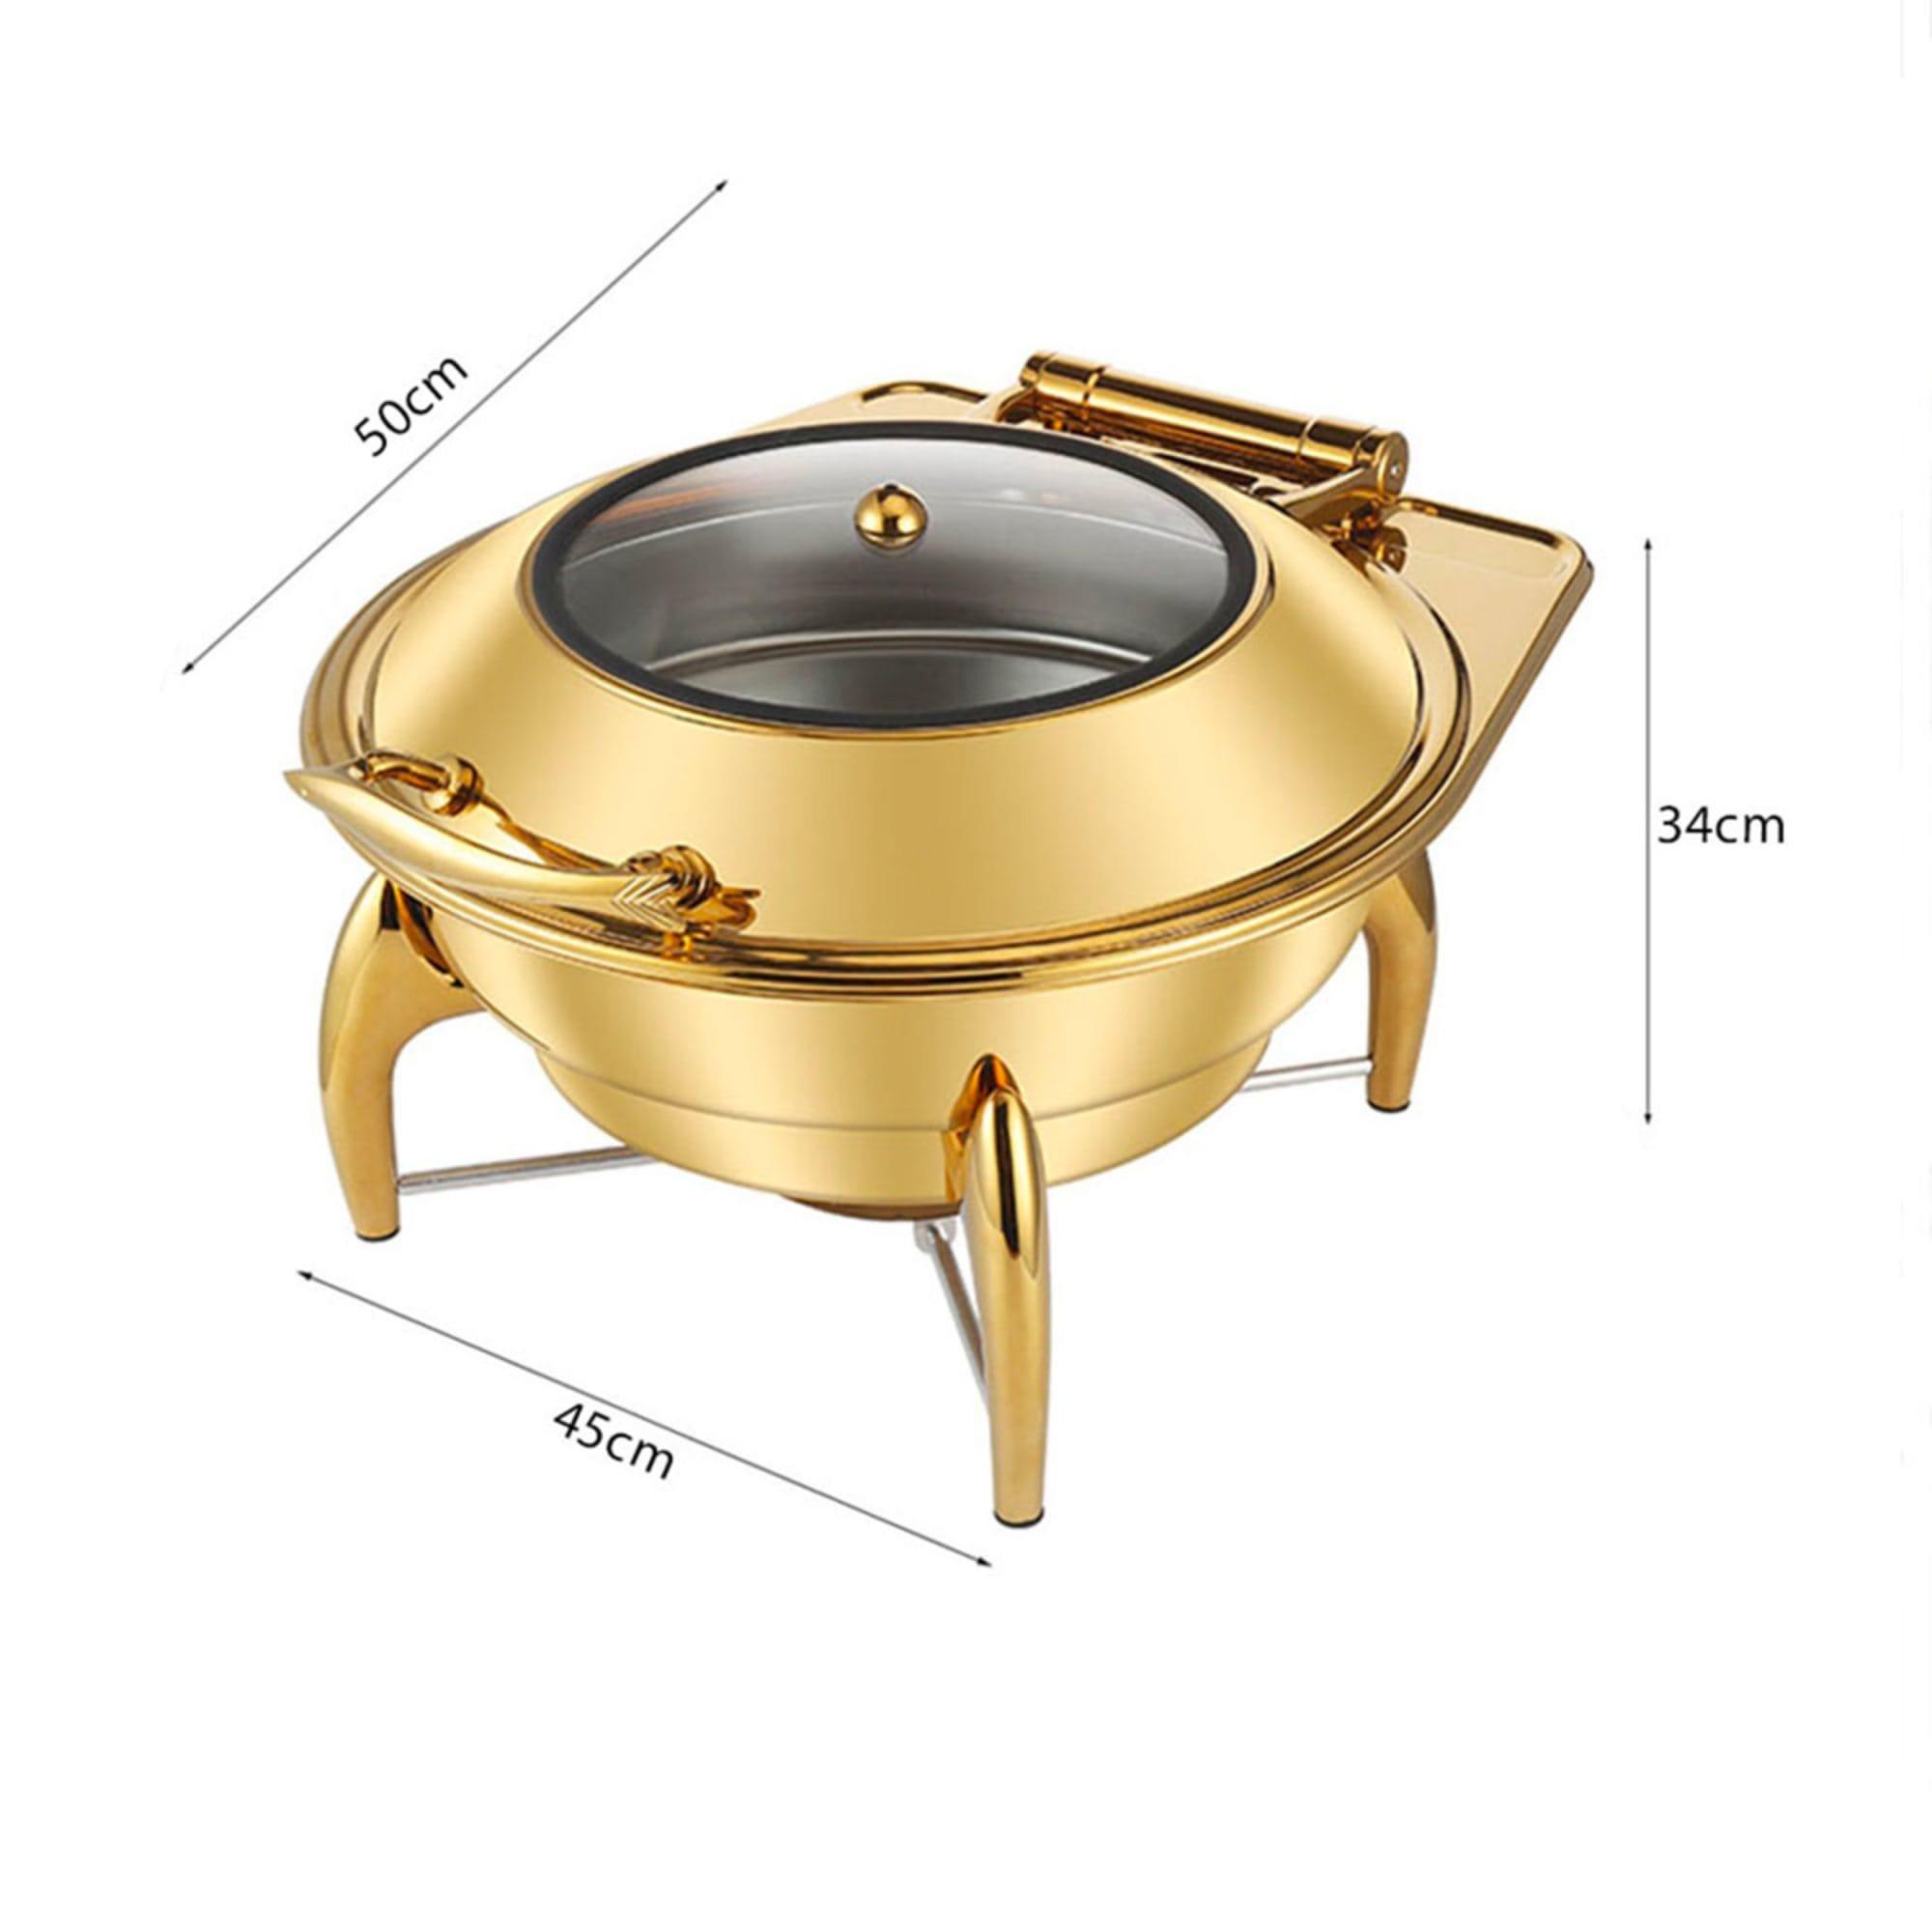 Soga Round Stainless Steel Chafing Dish with Top Lid Gold Image 5